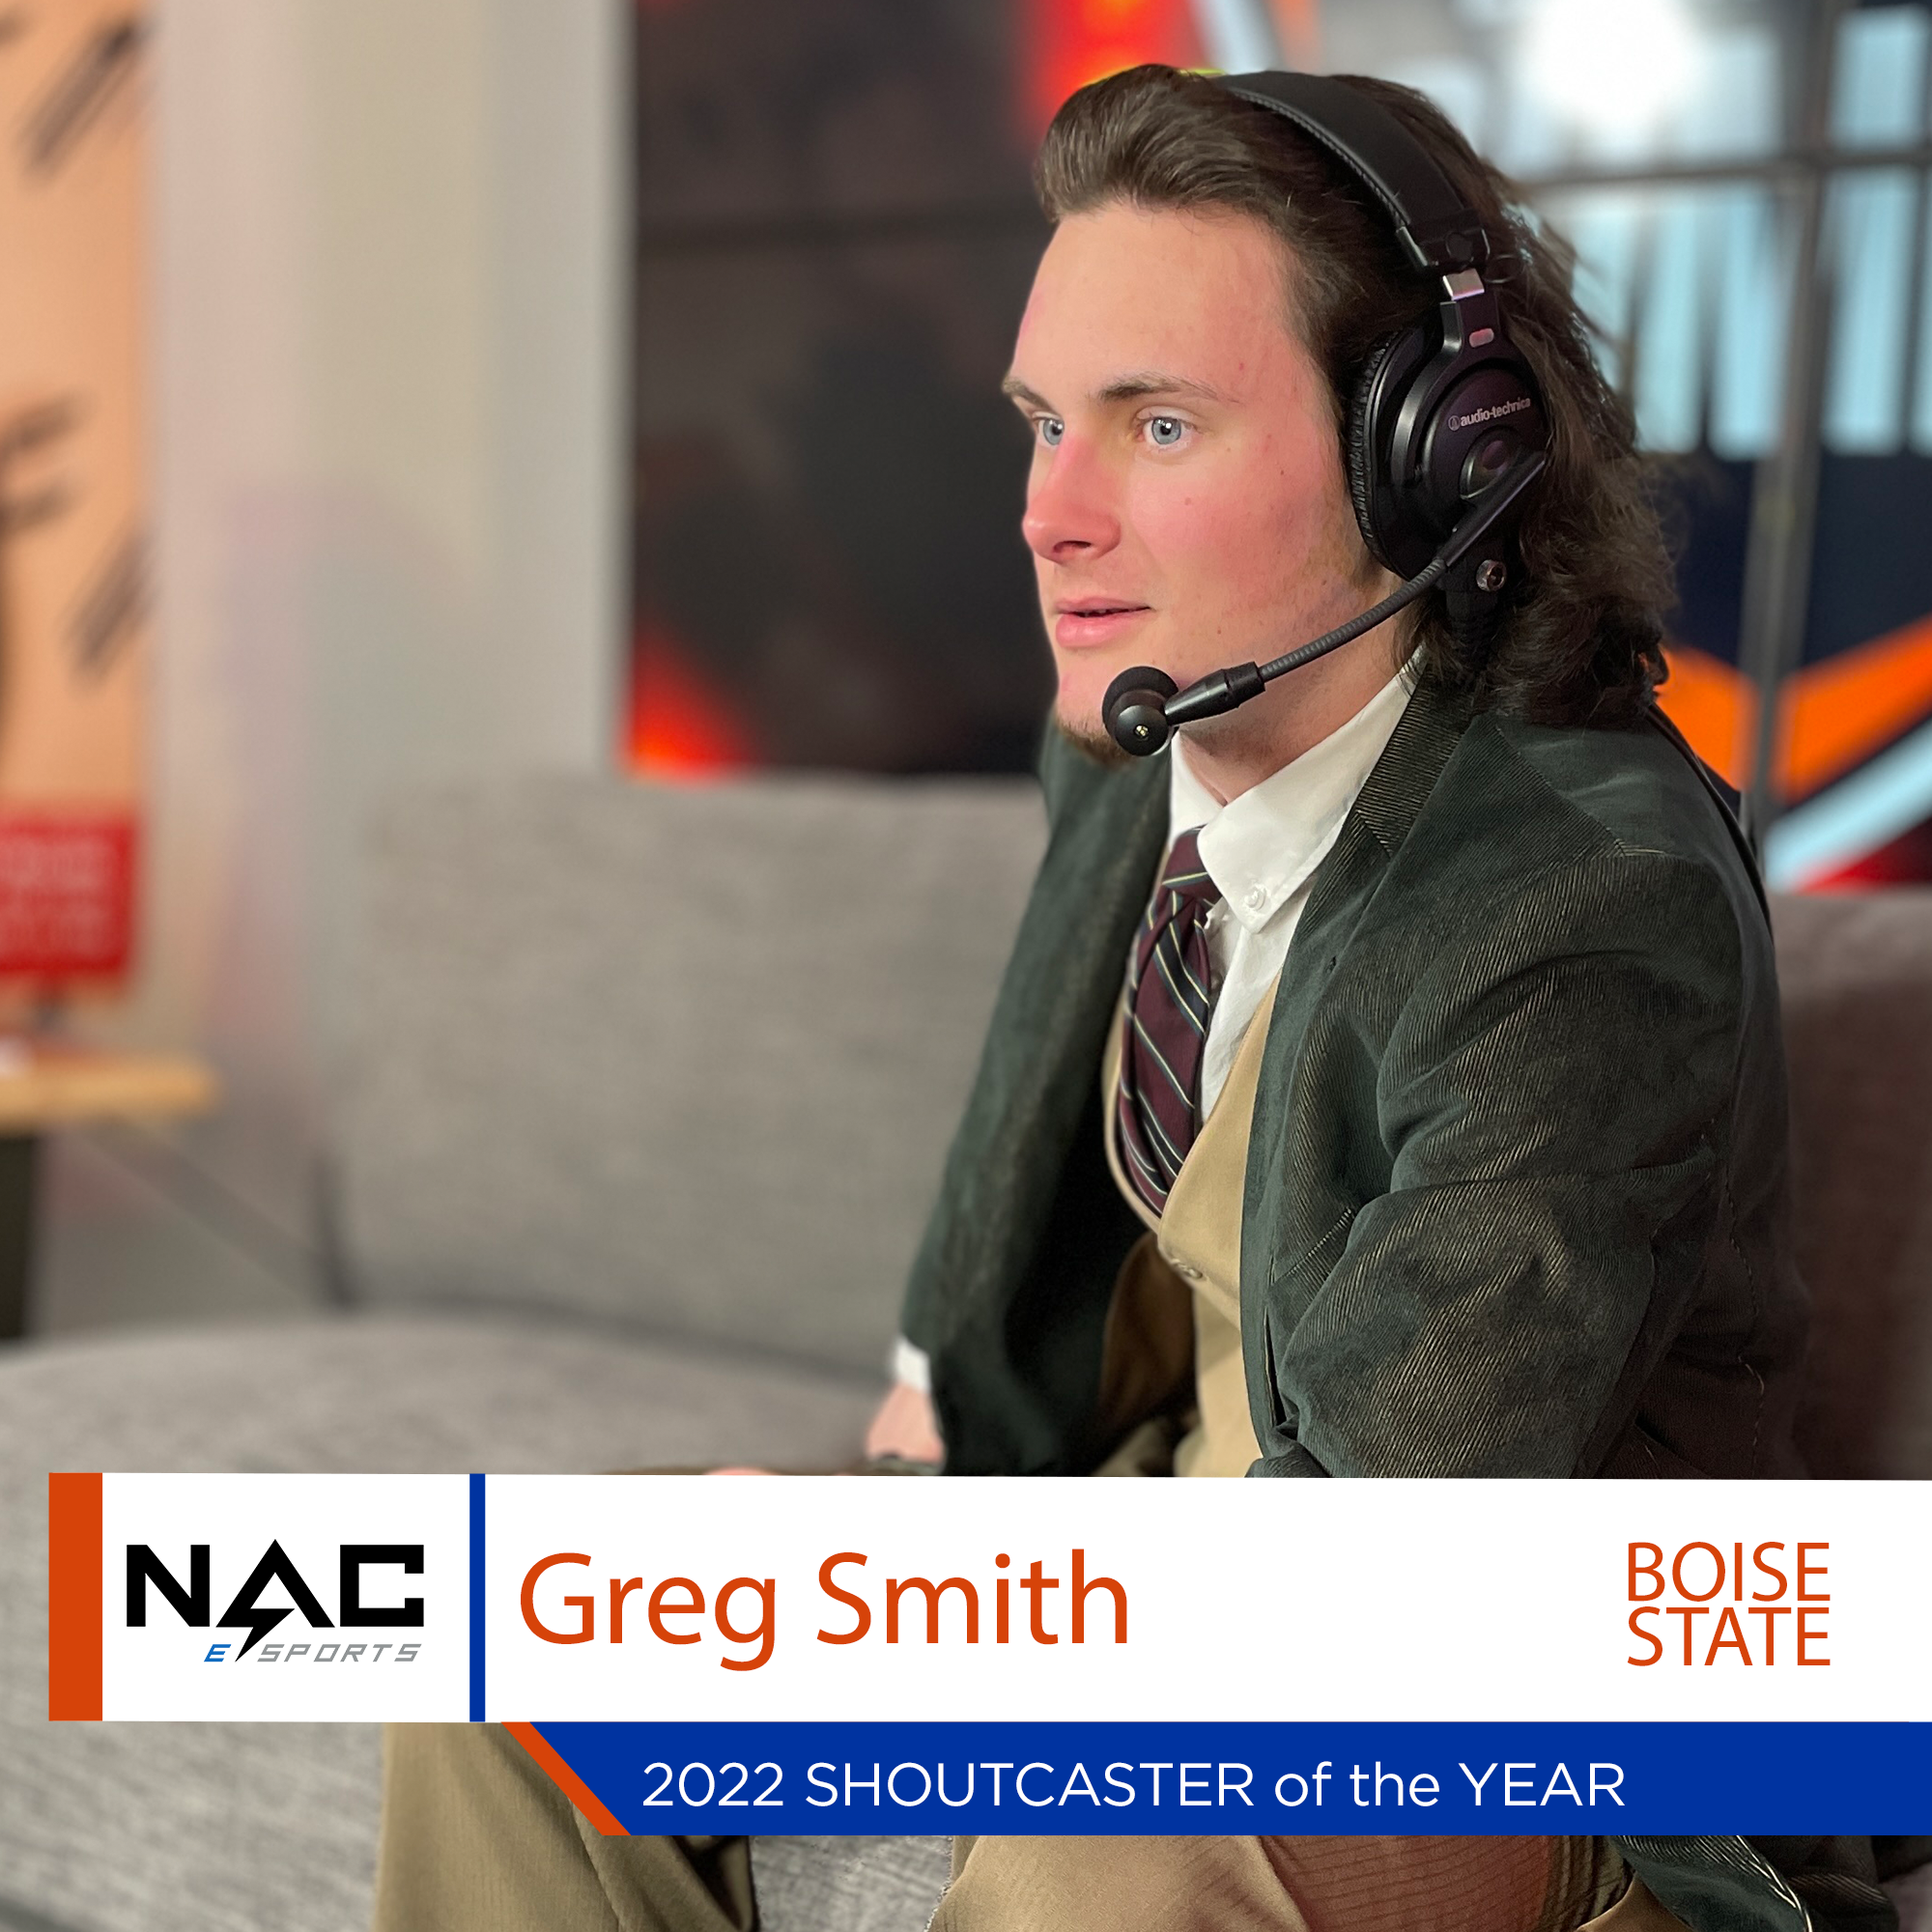 Greg sits on couch wearing a headset with microphone